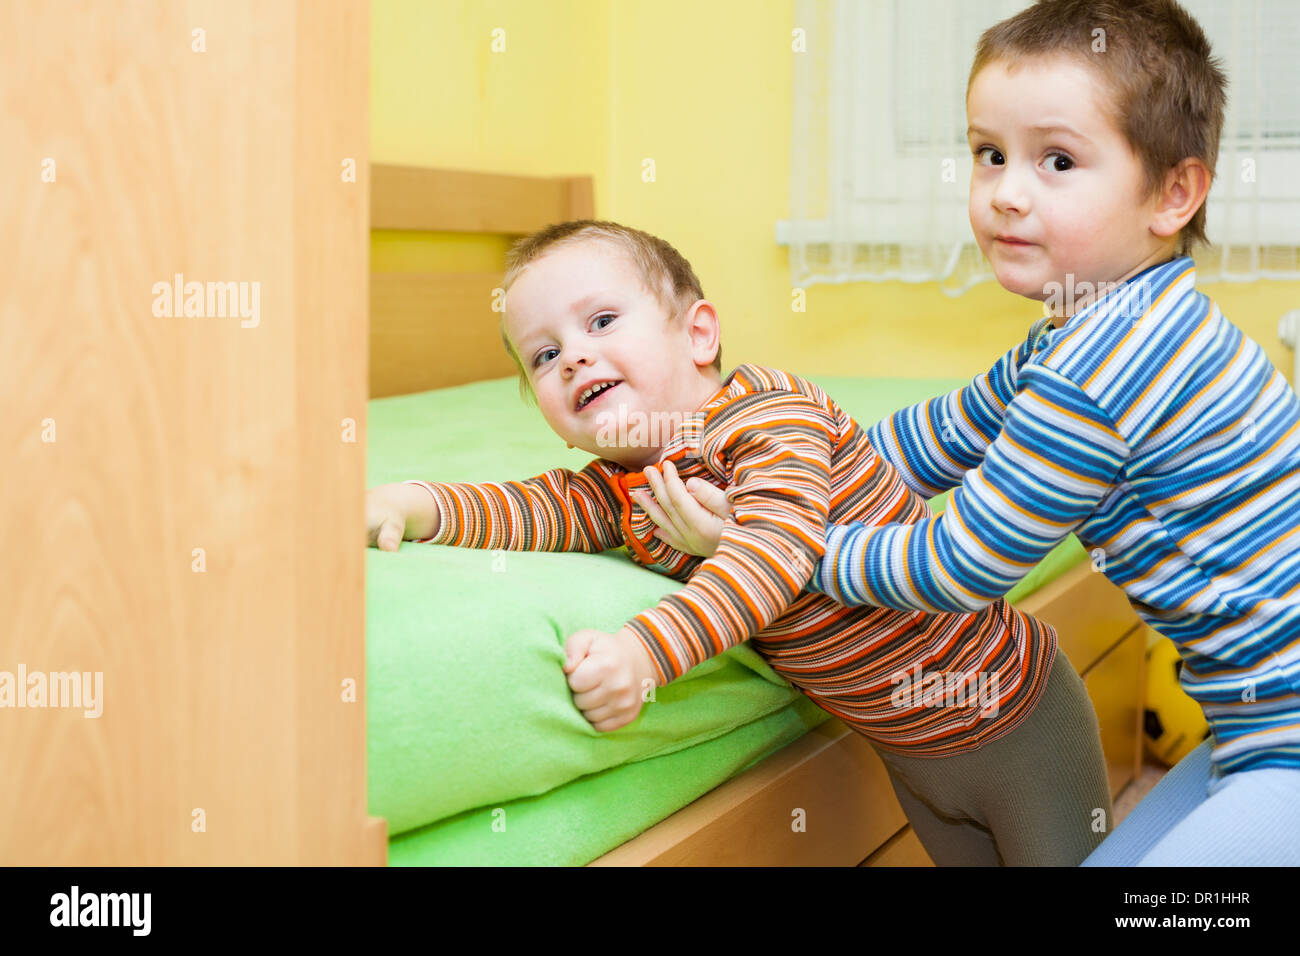 Two children playing together and having fun at home Stock Photo